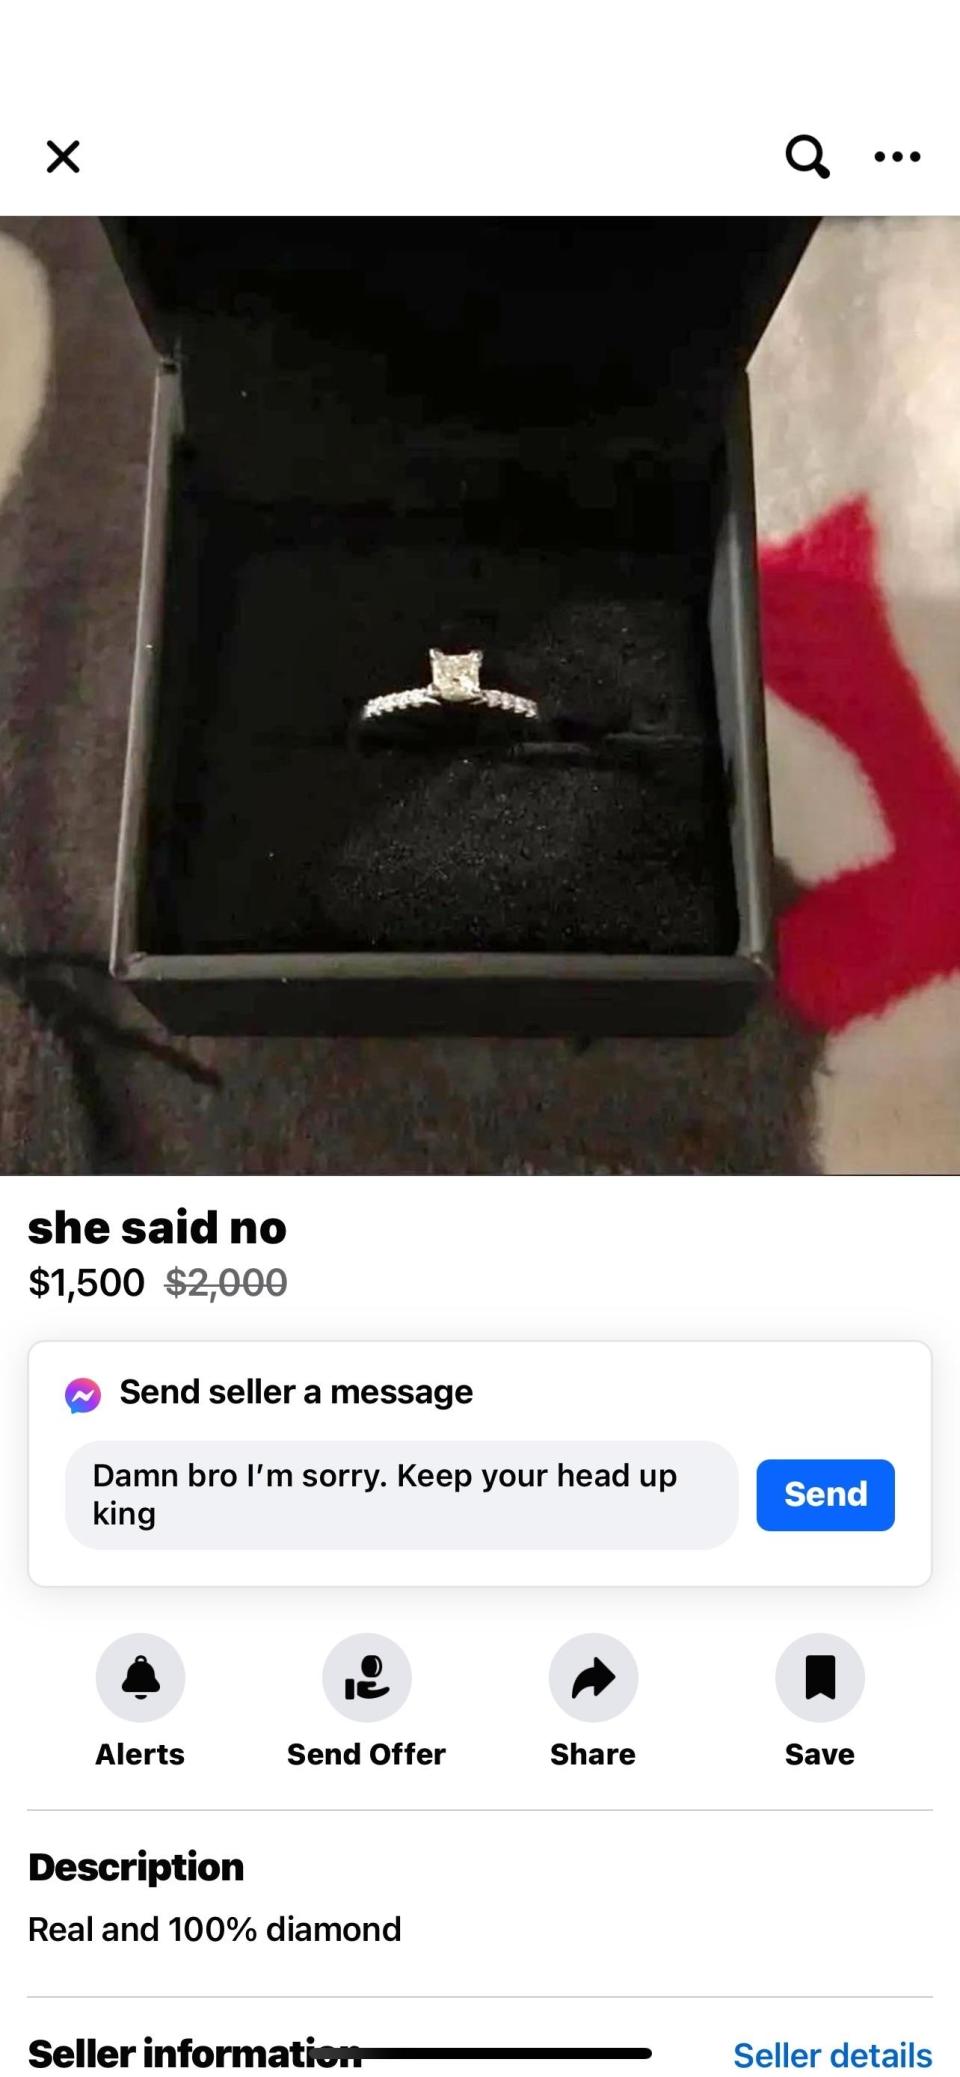 A diamond ring in a case, with caption "She said no," with $2,000 crossed out and price of $1,500